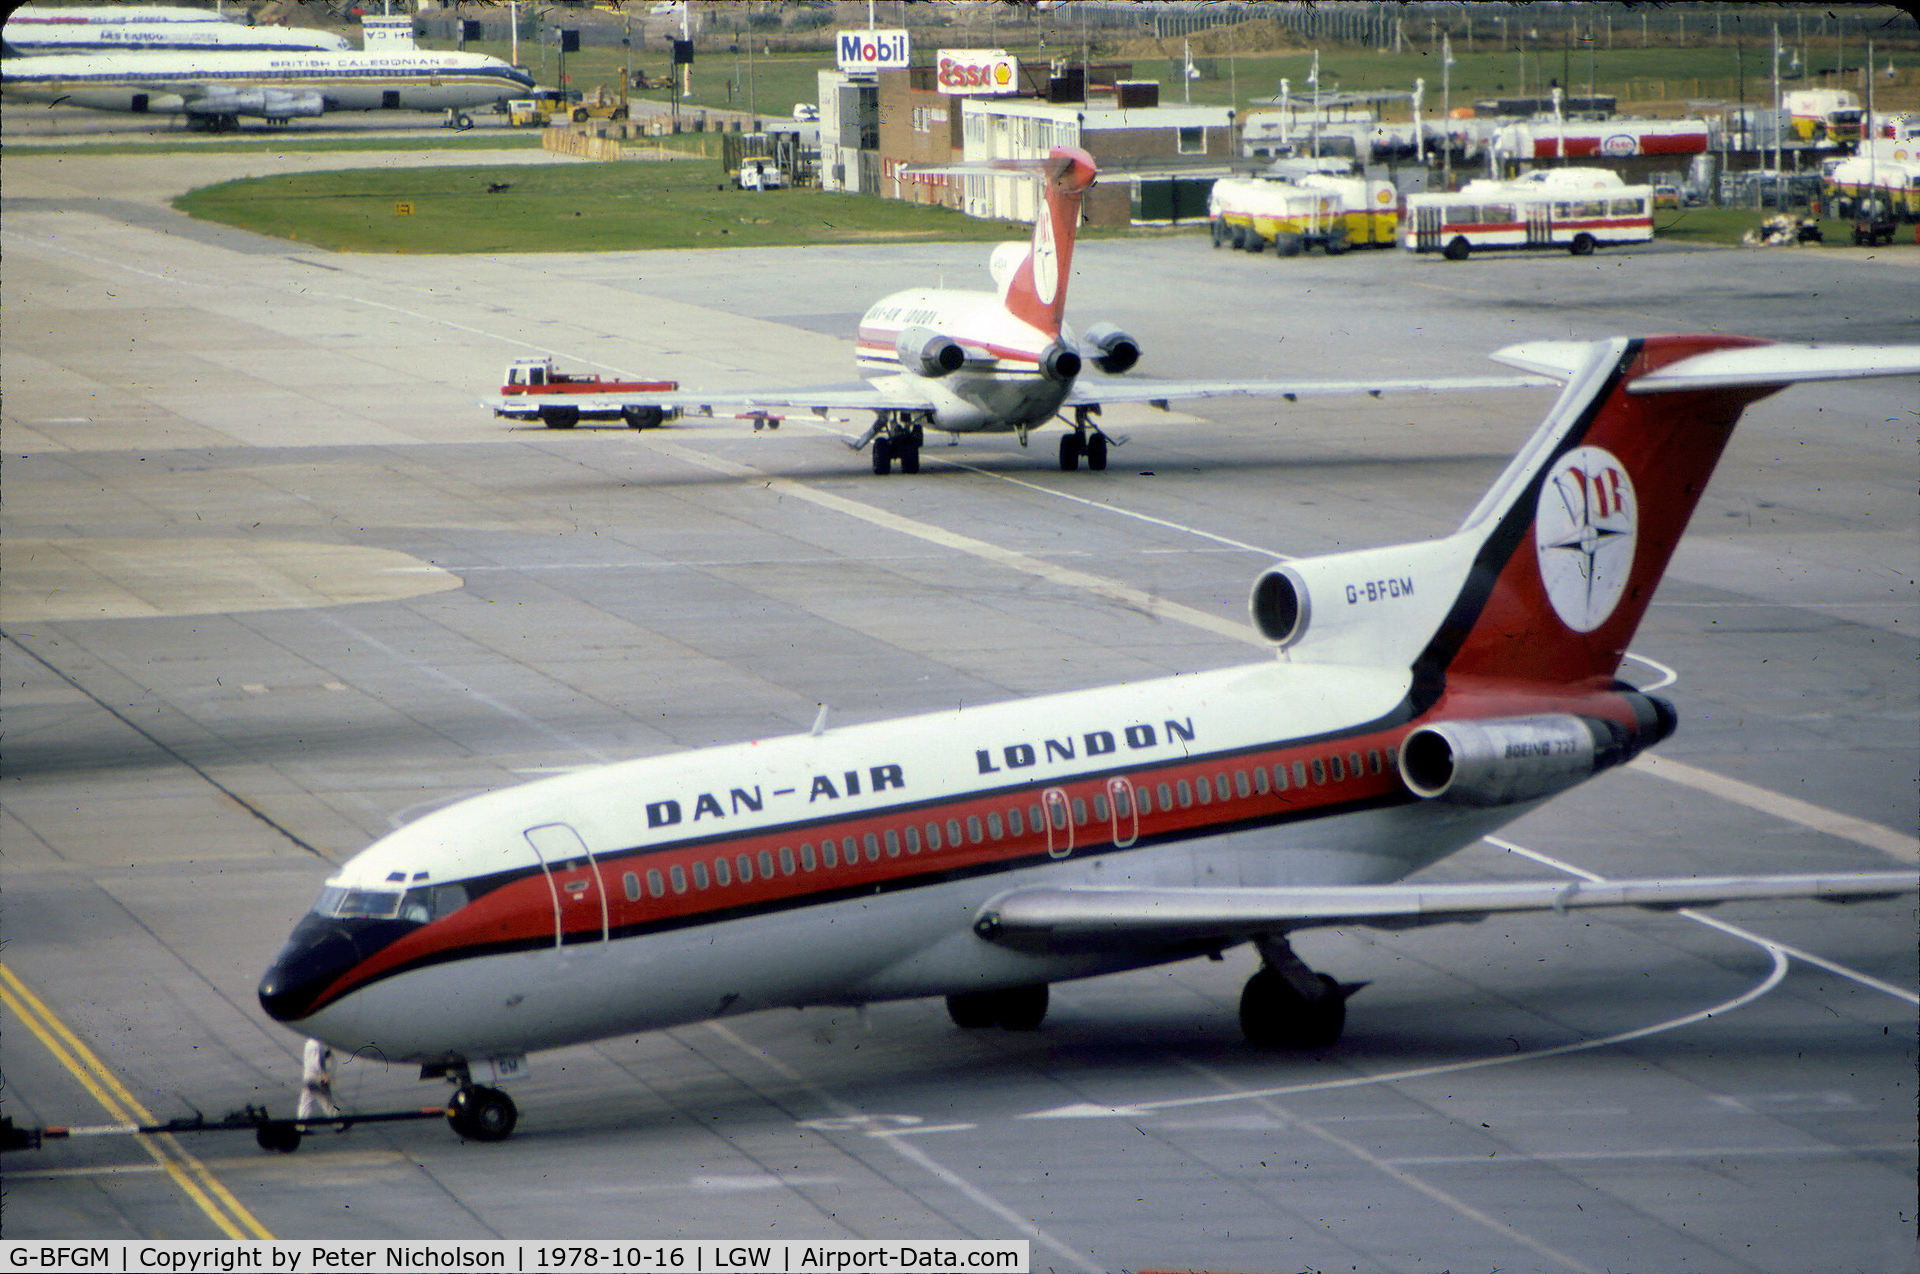 G-BFGM, 1966 Boeing 727-95 C/N 19249, Boeing 727-95 of Dan-Air taxying at London Gatwick in October 1978.